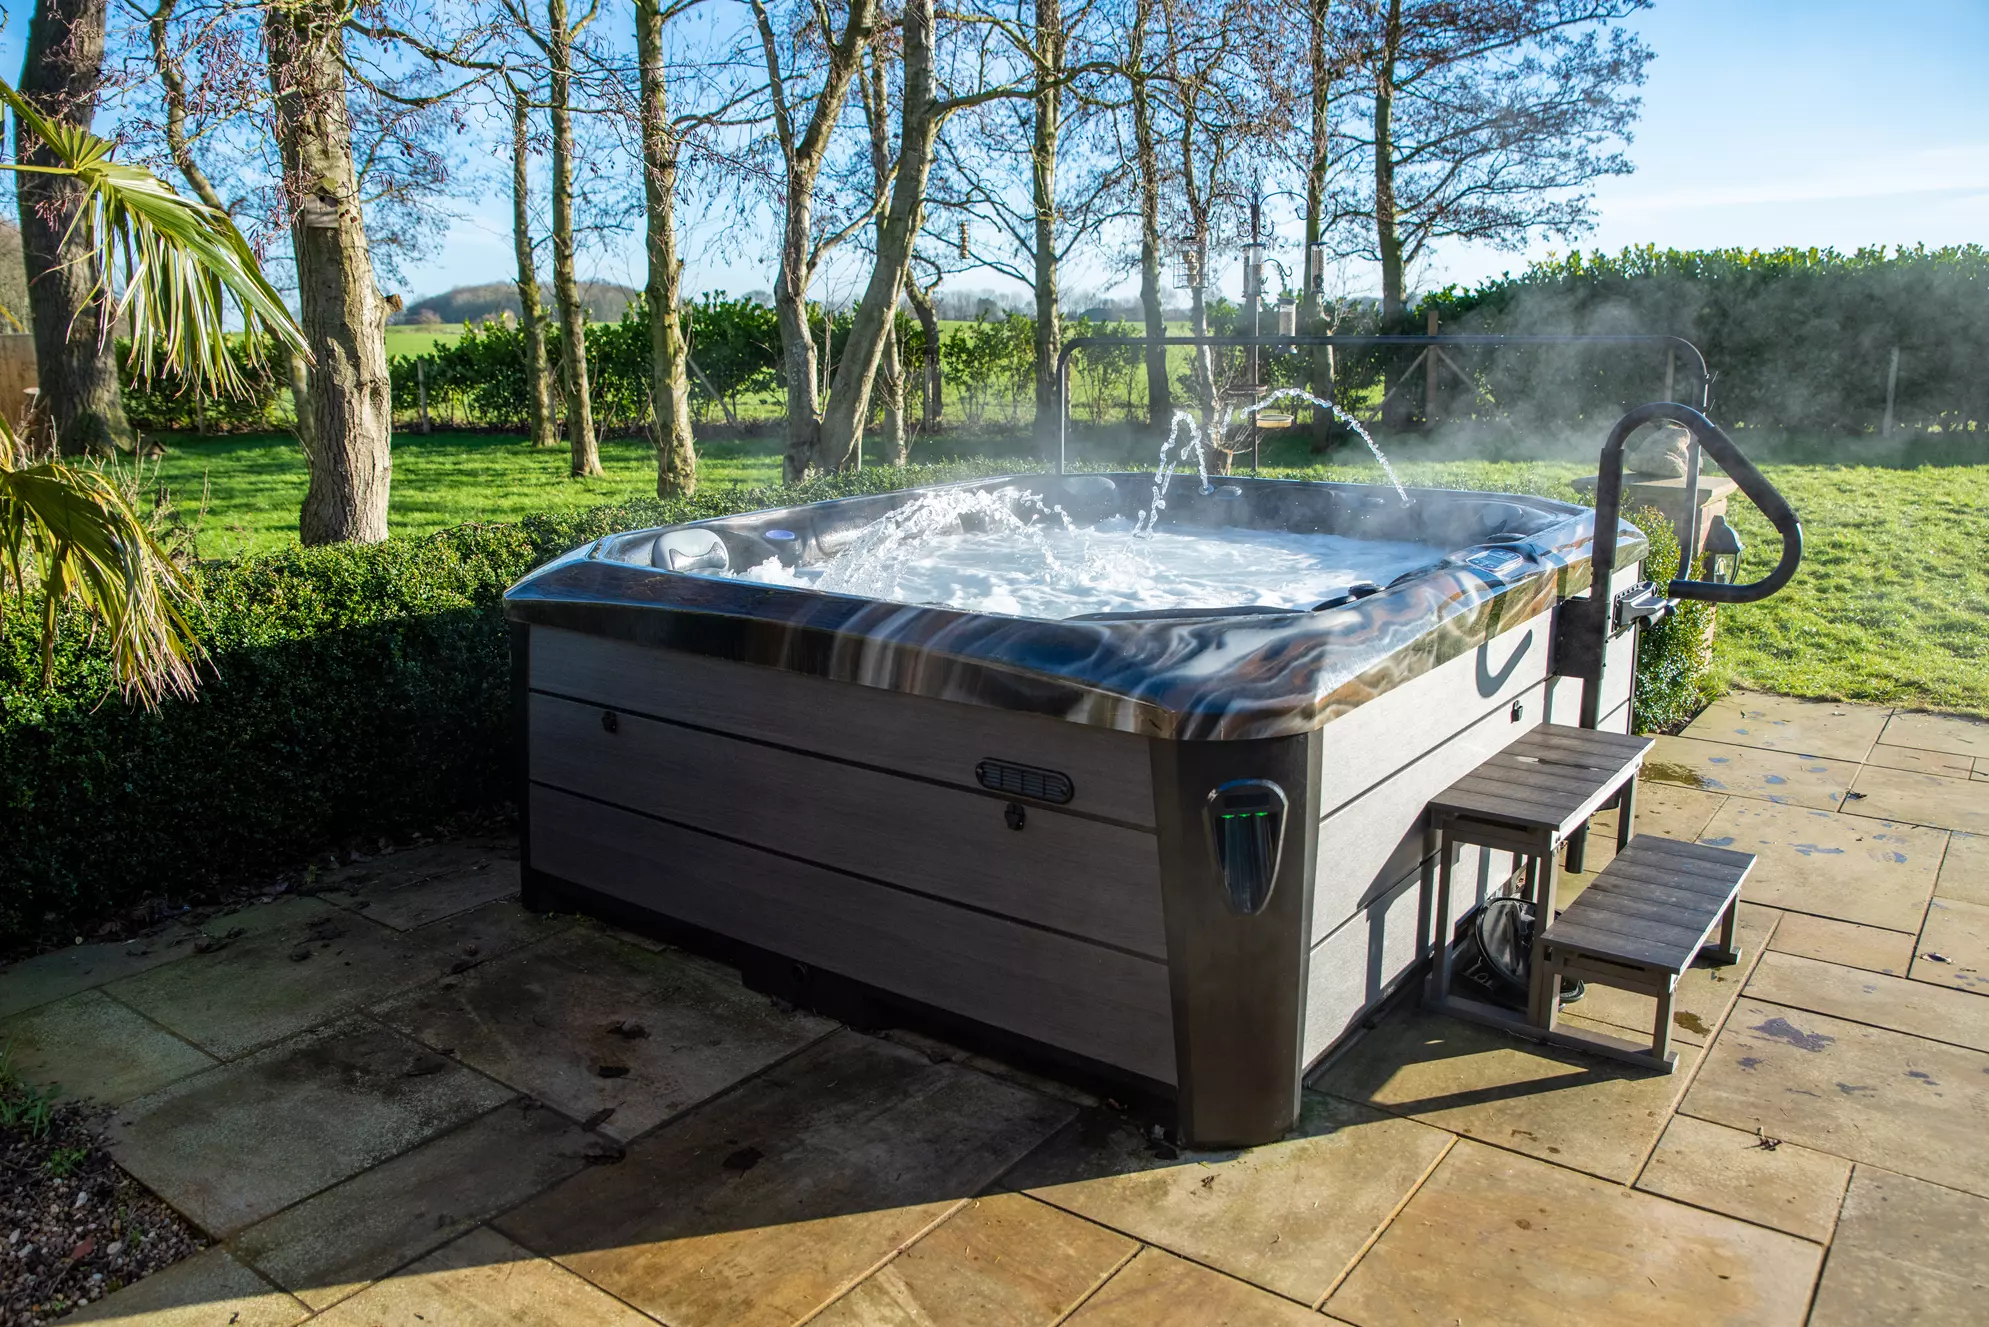 The ultimate hot tub experience for entertaining, with space for 8 people.